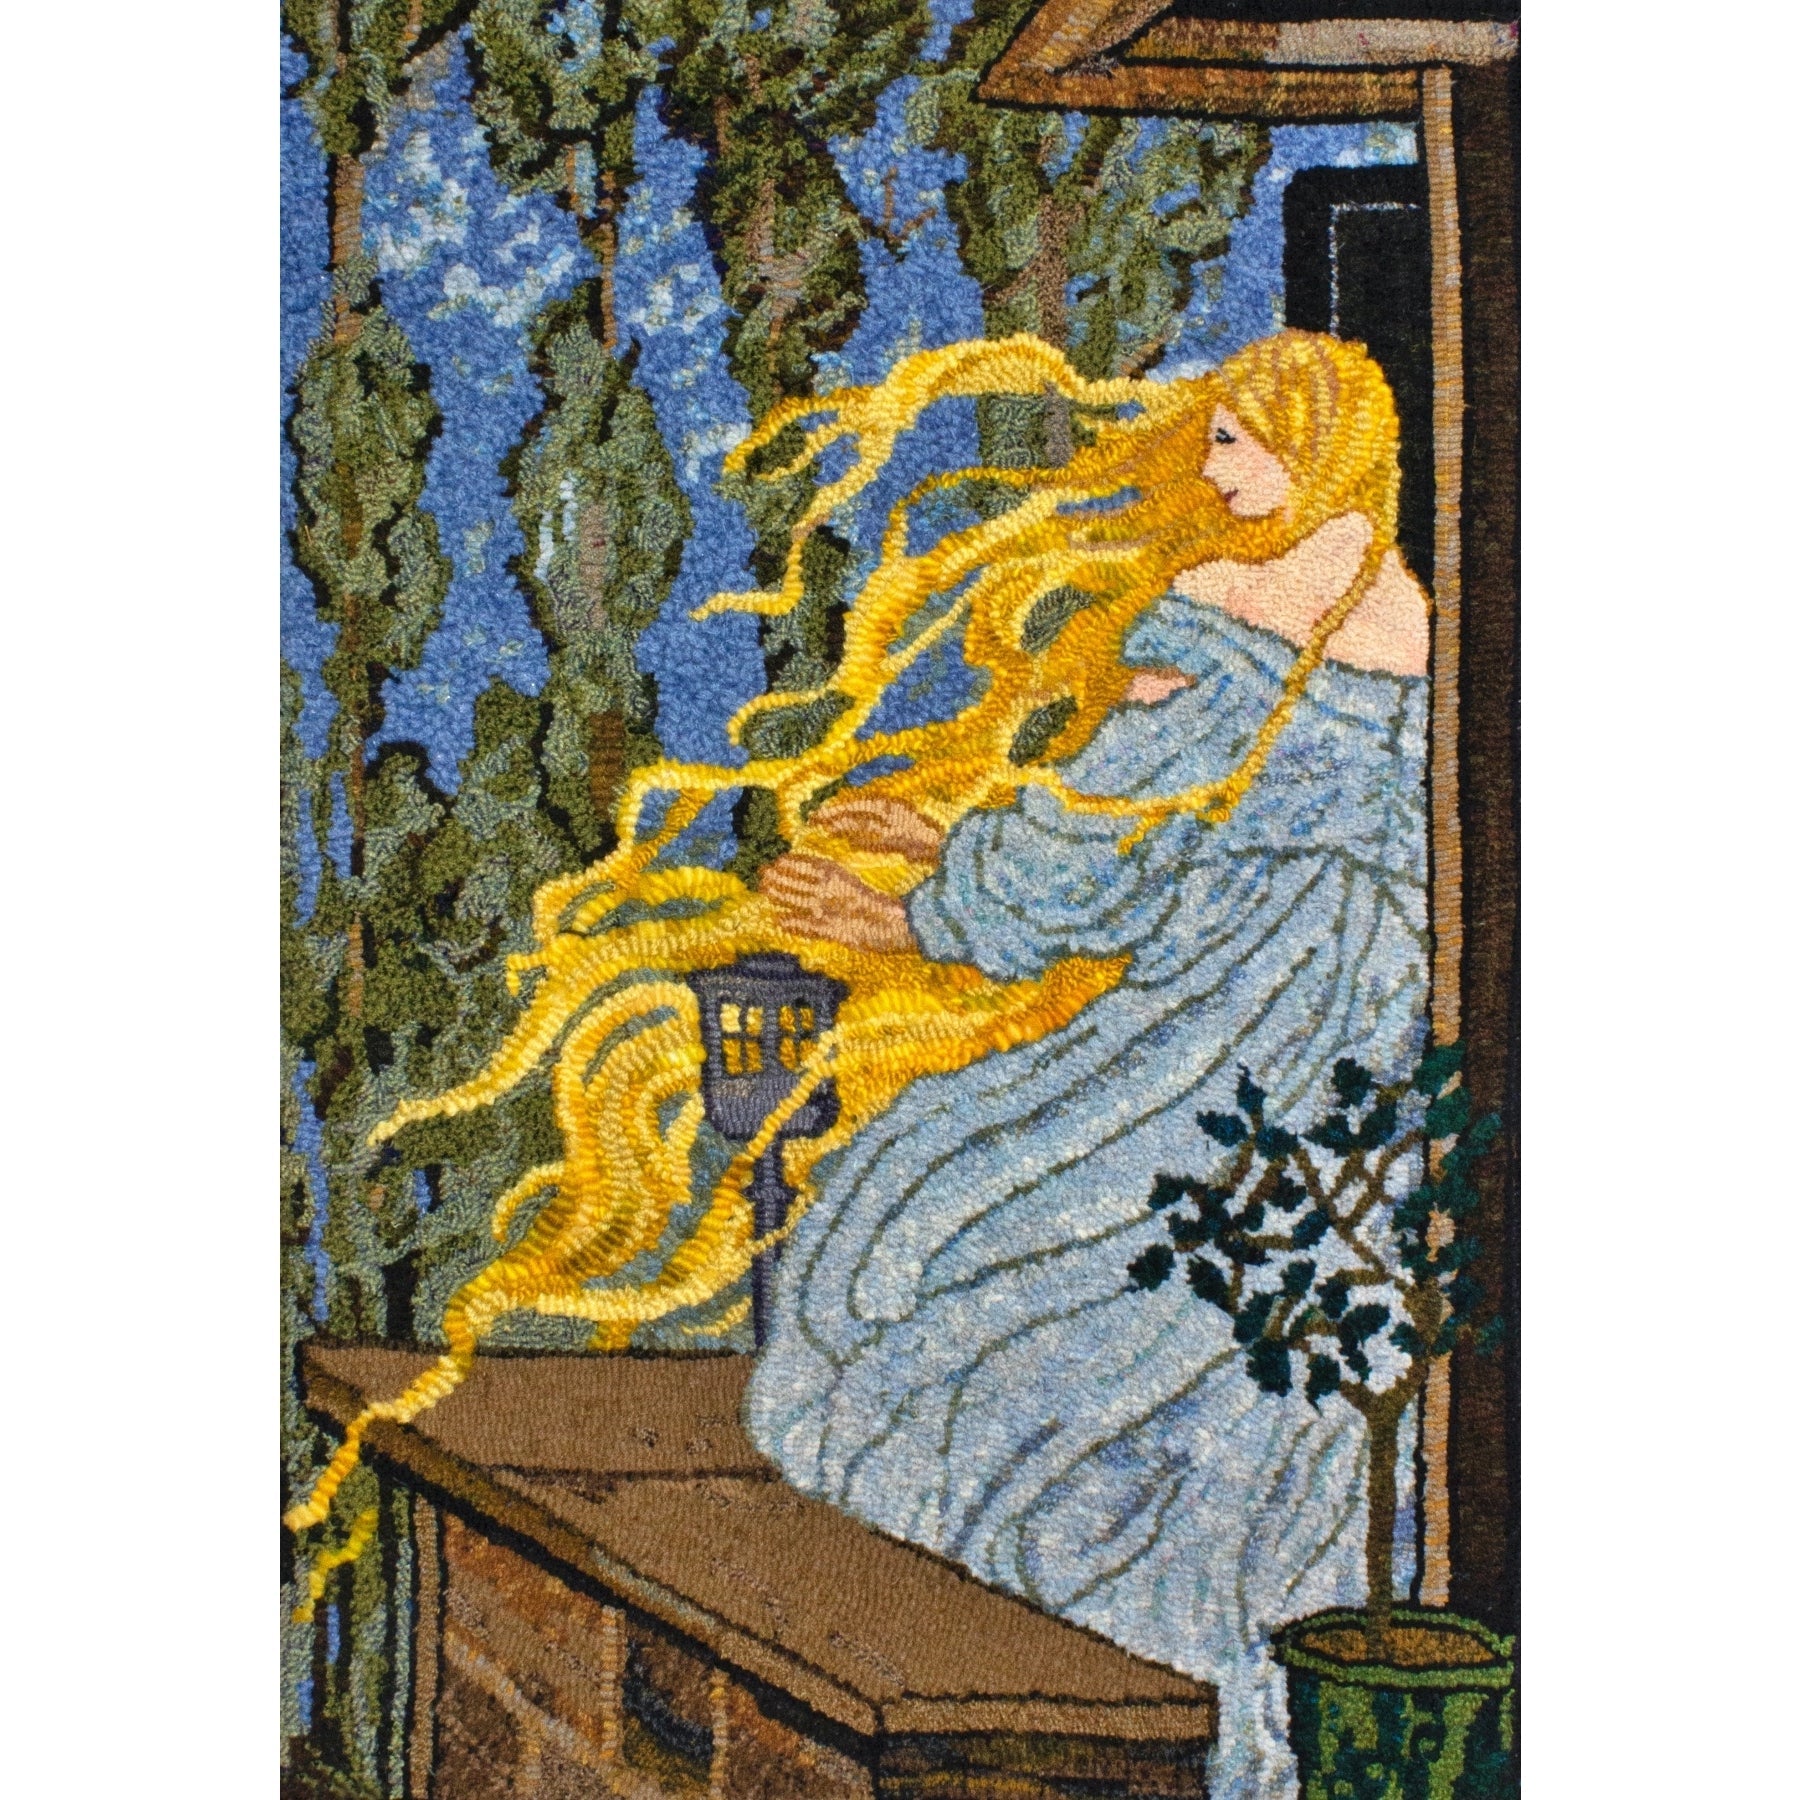 Small Rapunzel, Ill. Emma Florence Henderson, 1891, rug hooked by Judy Carter